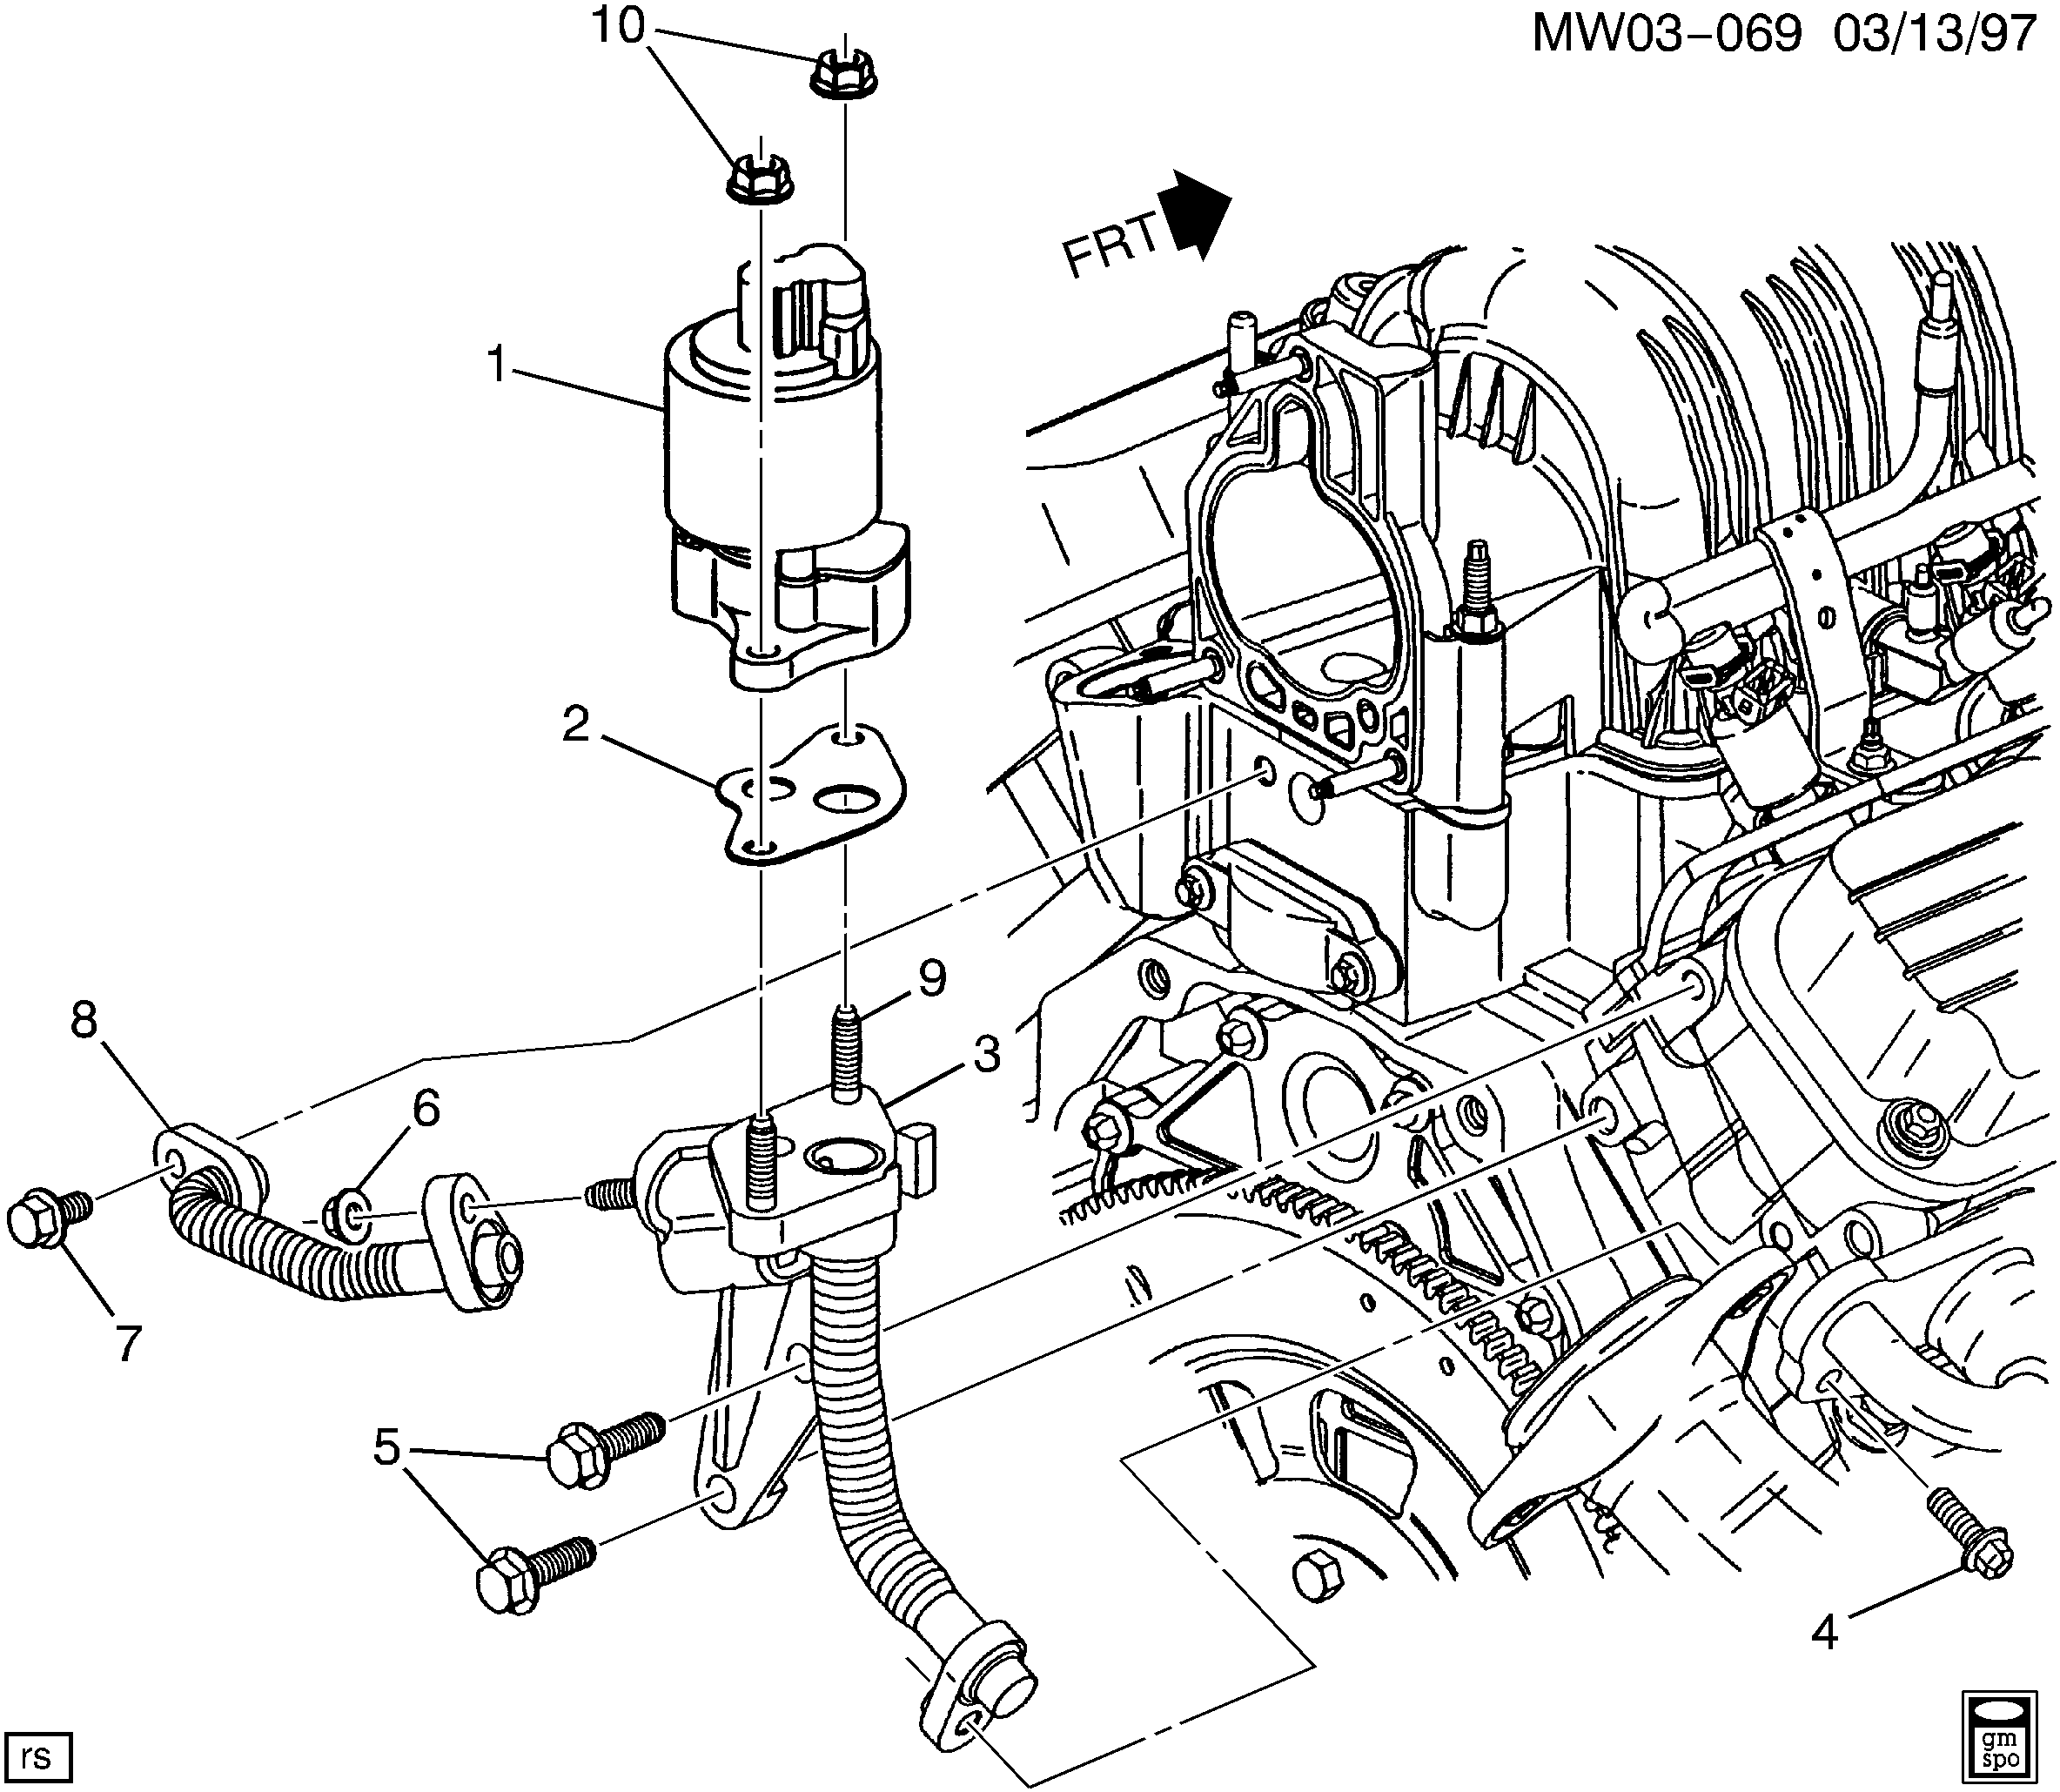 1998-1999 W19-27 E.G.R. VALVE & RELATED PARTS (L36/3.8K)